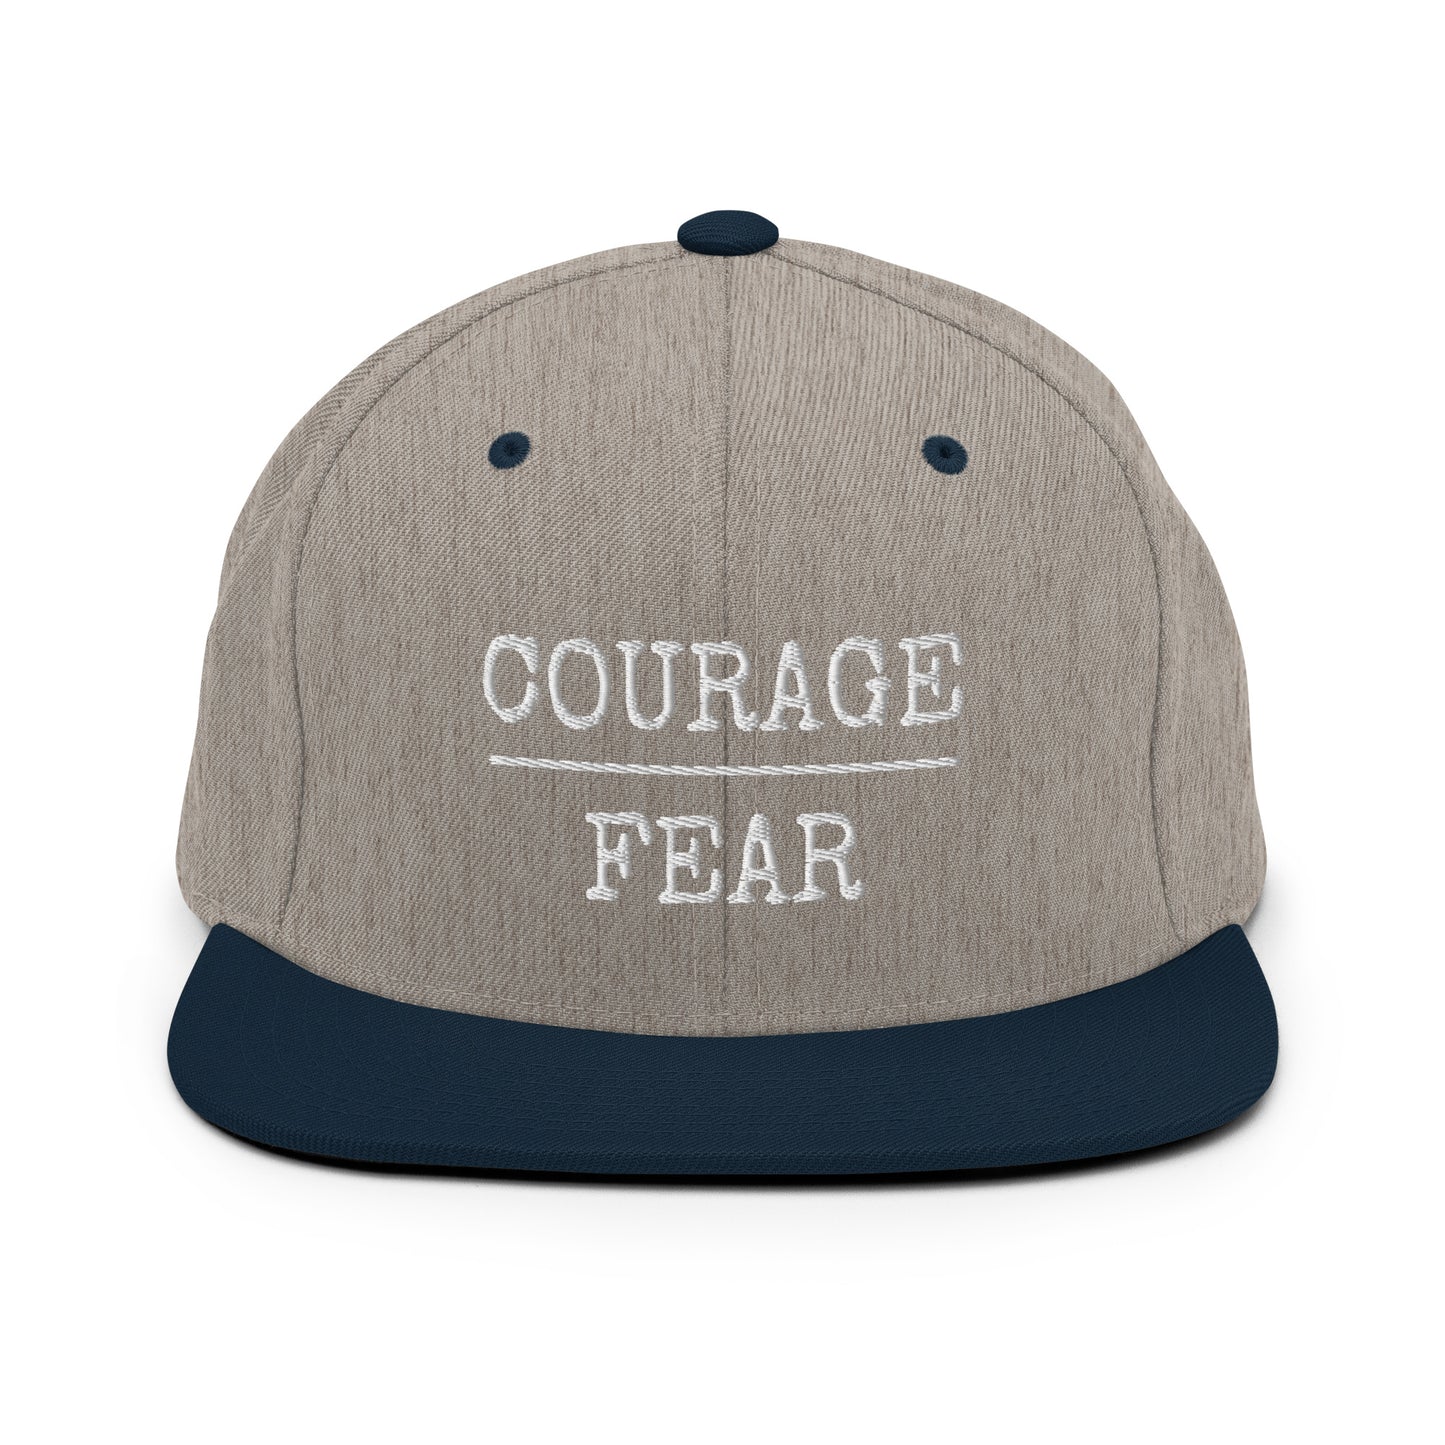 COURAGE/FEAR Snapback Hat